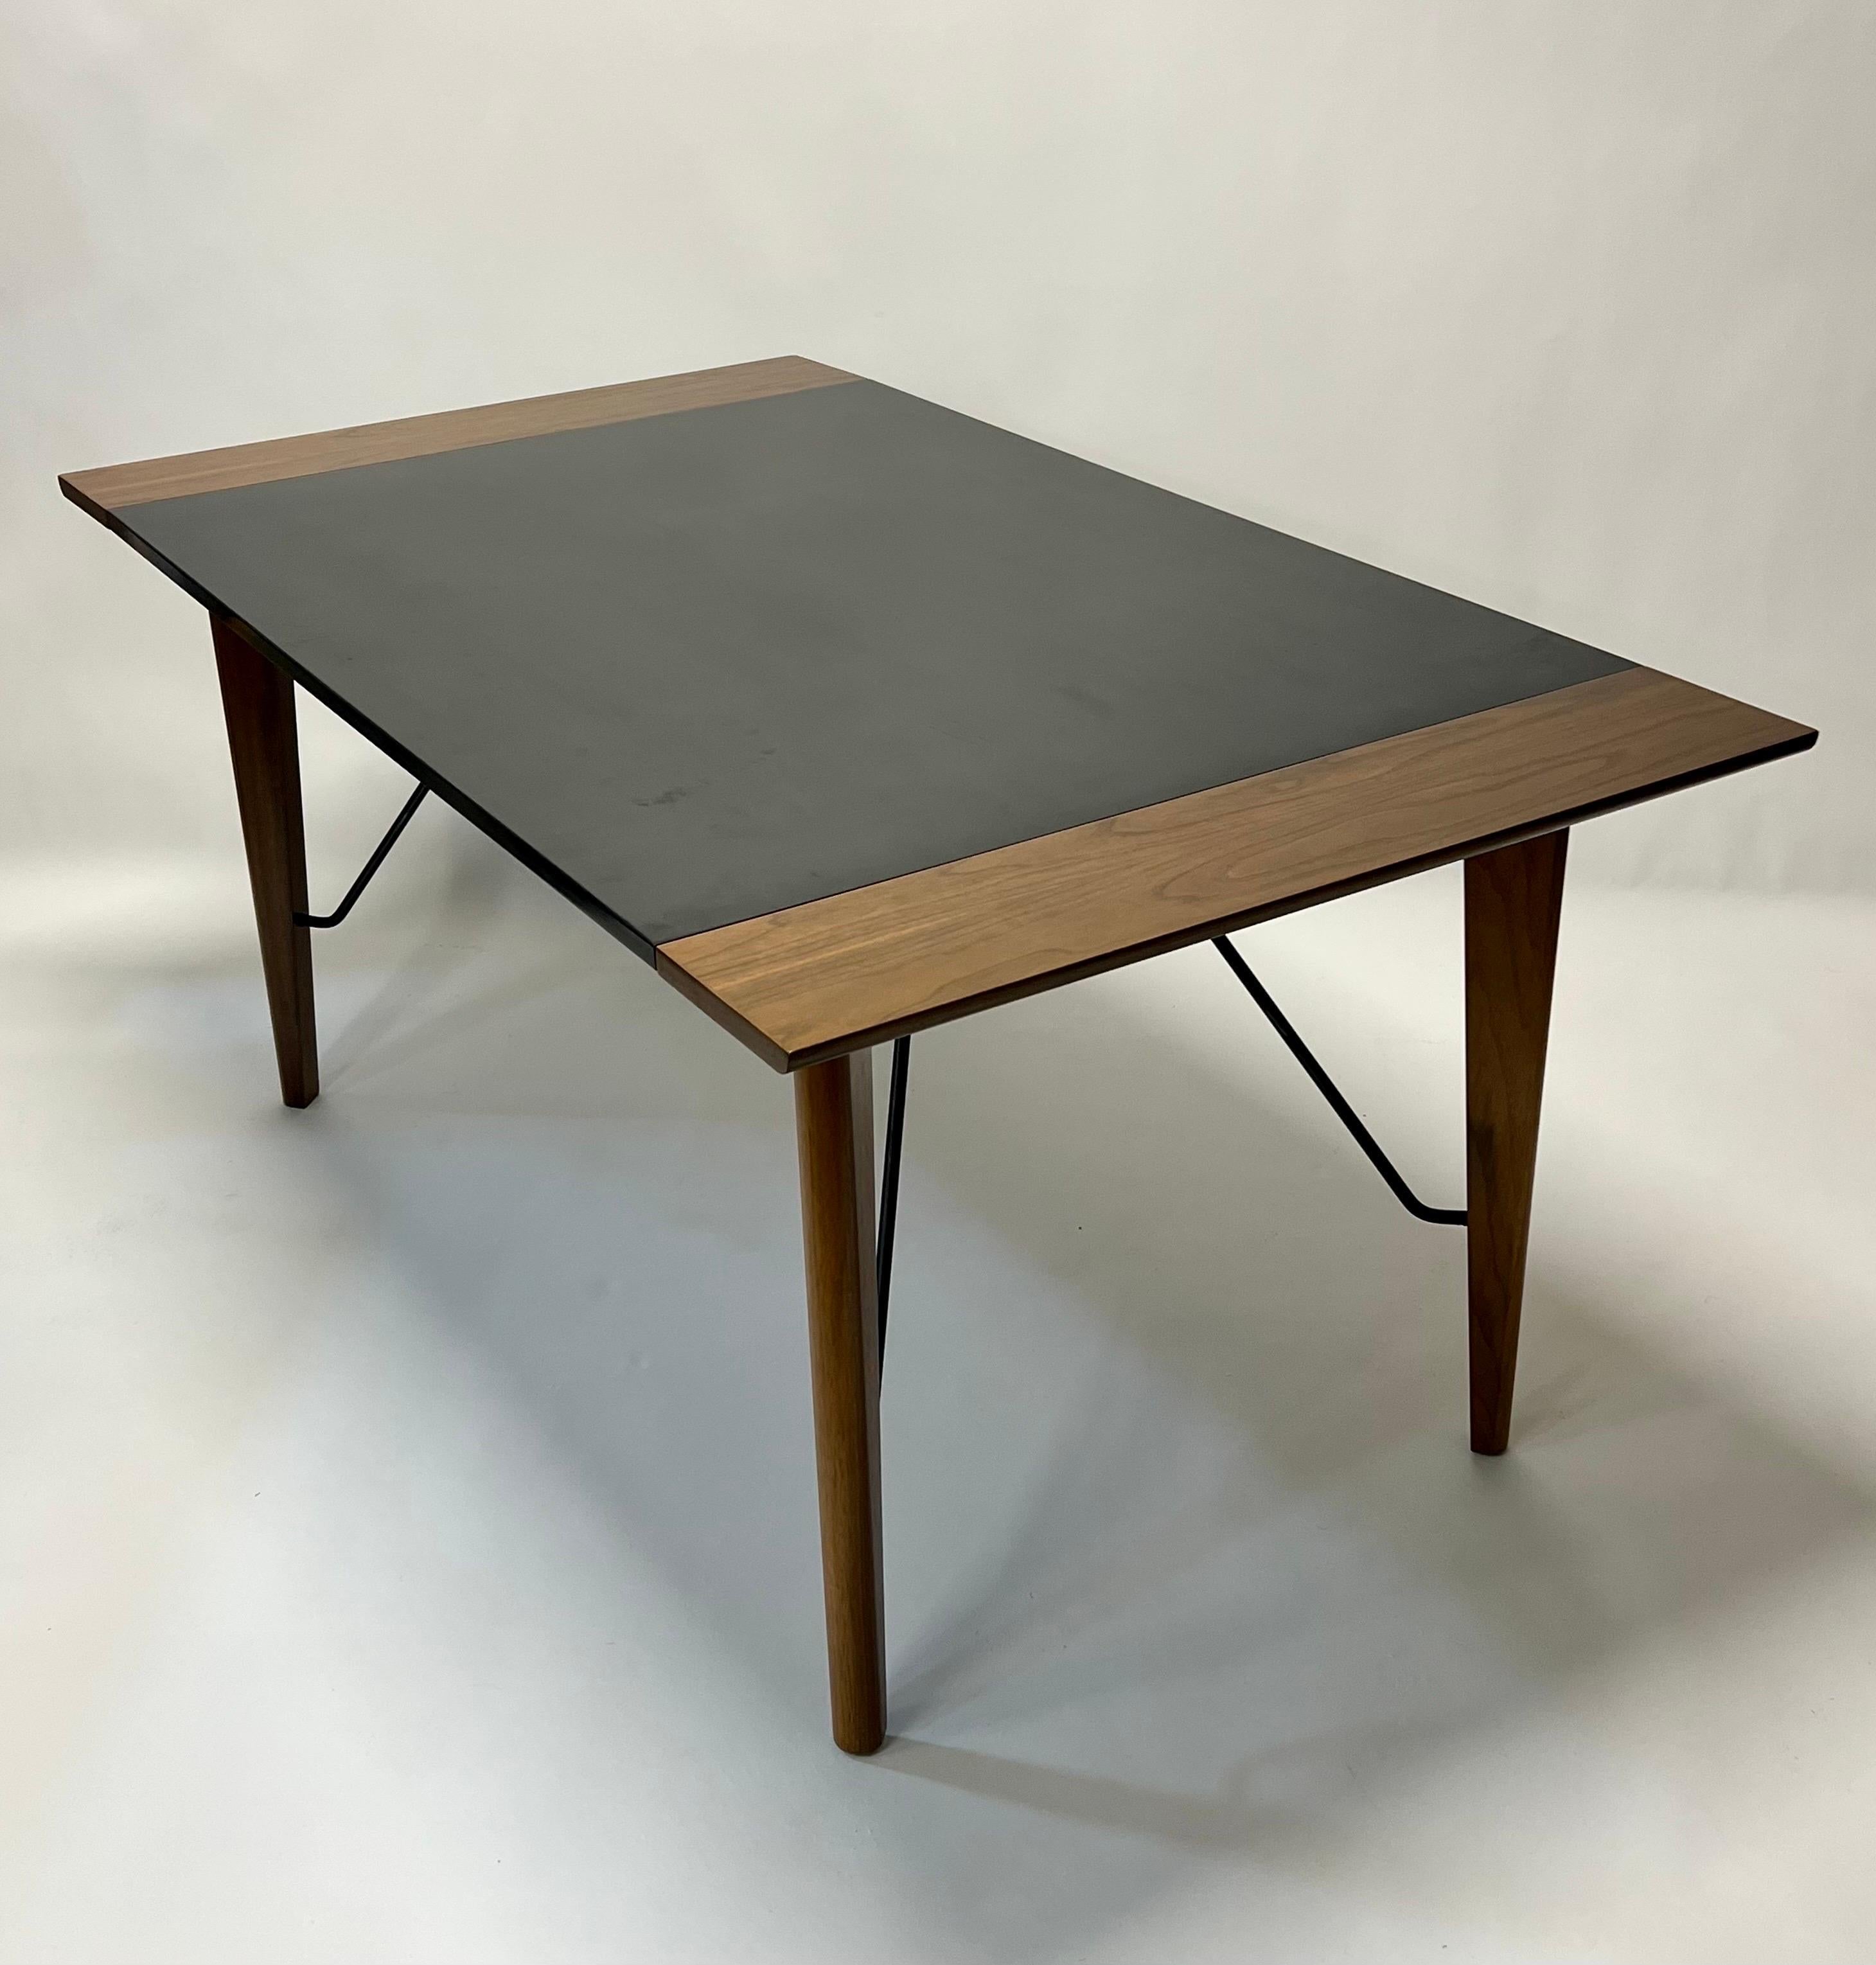 Rare and iconic expanding walnut & black laminate dining table with iron cross-stretchers by famous Swedish/California designer/architect, Greta Grossman for Glenn of California c1952. This table was also offered without the iron cross-stretcher,